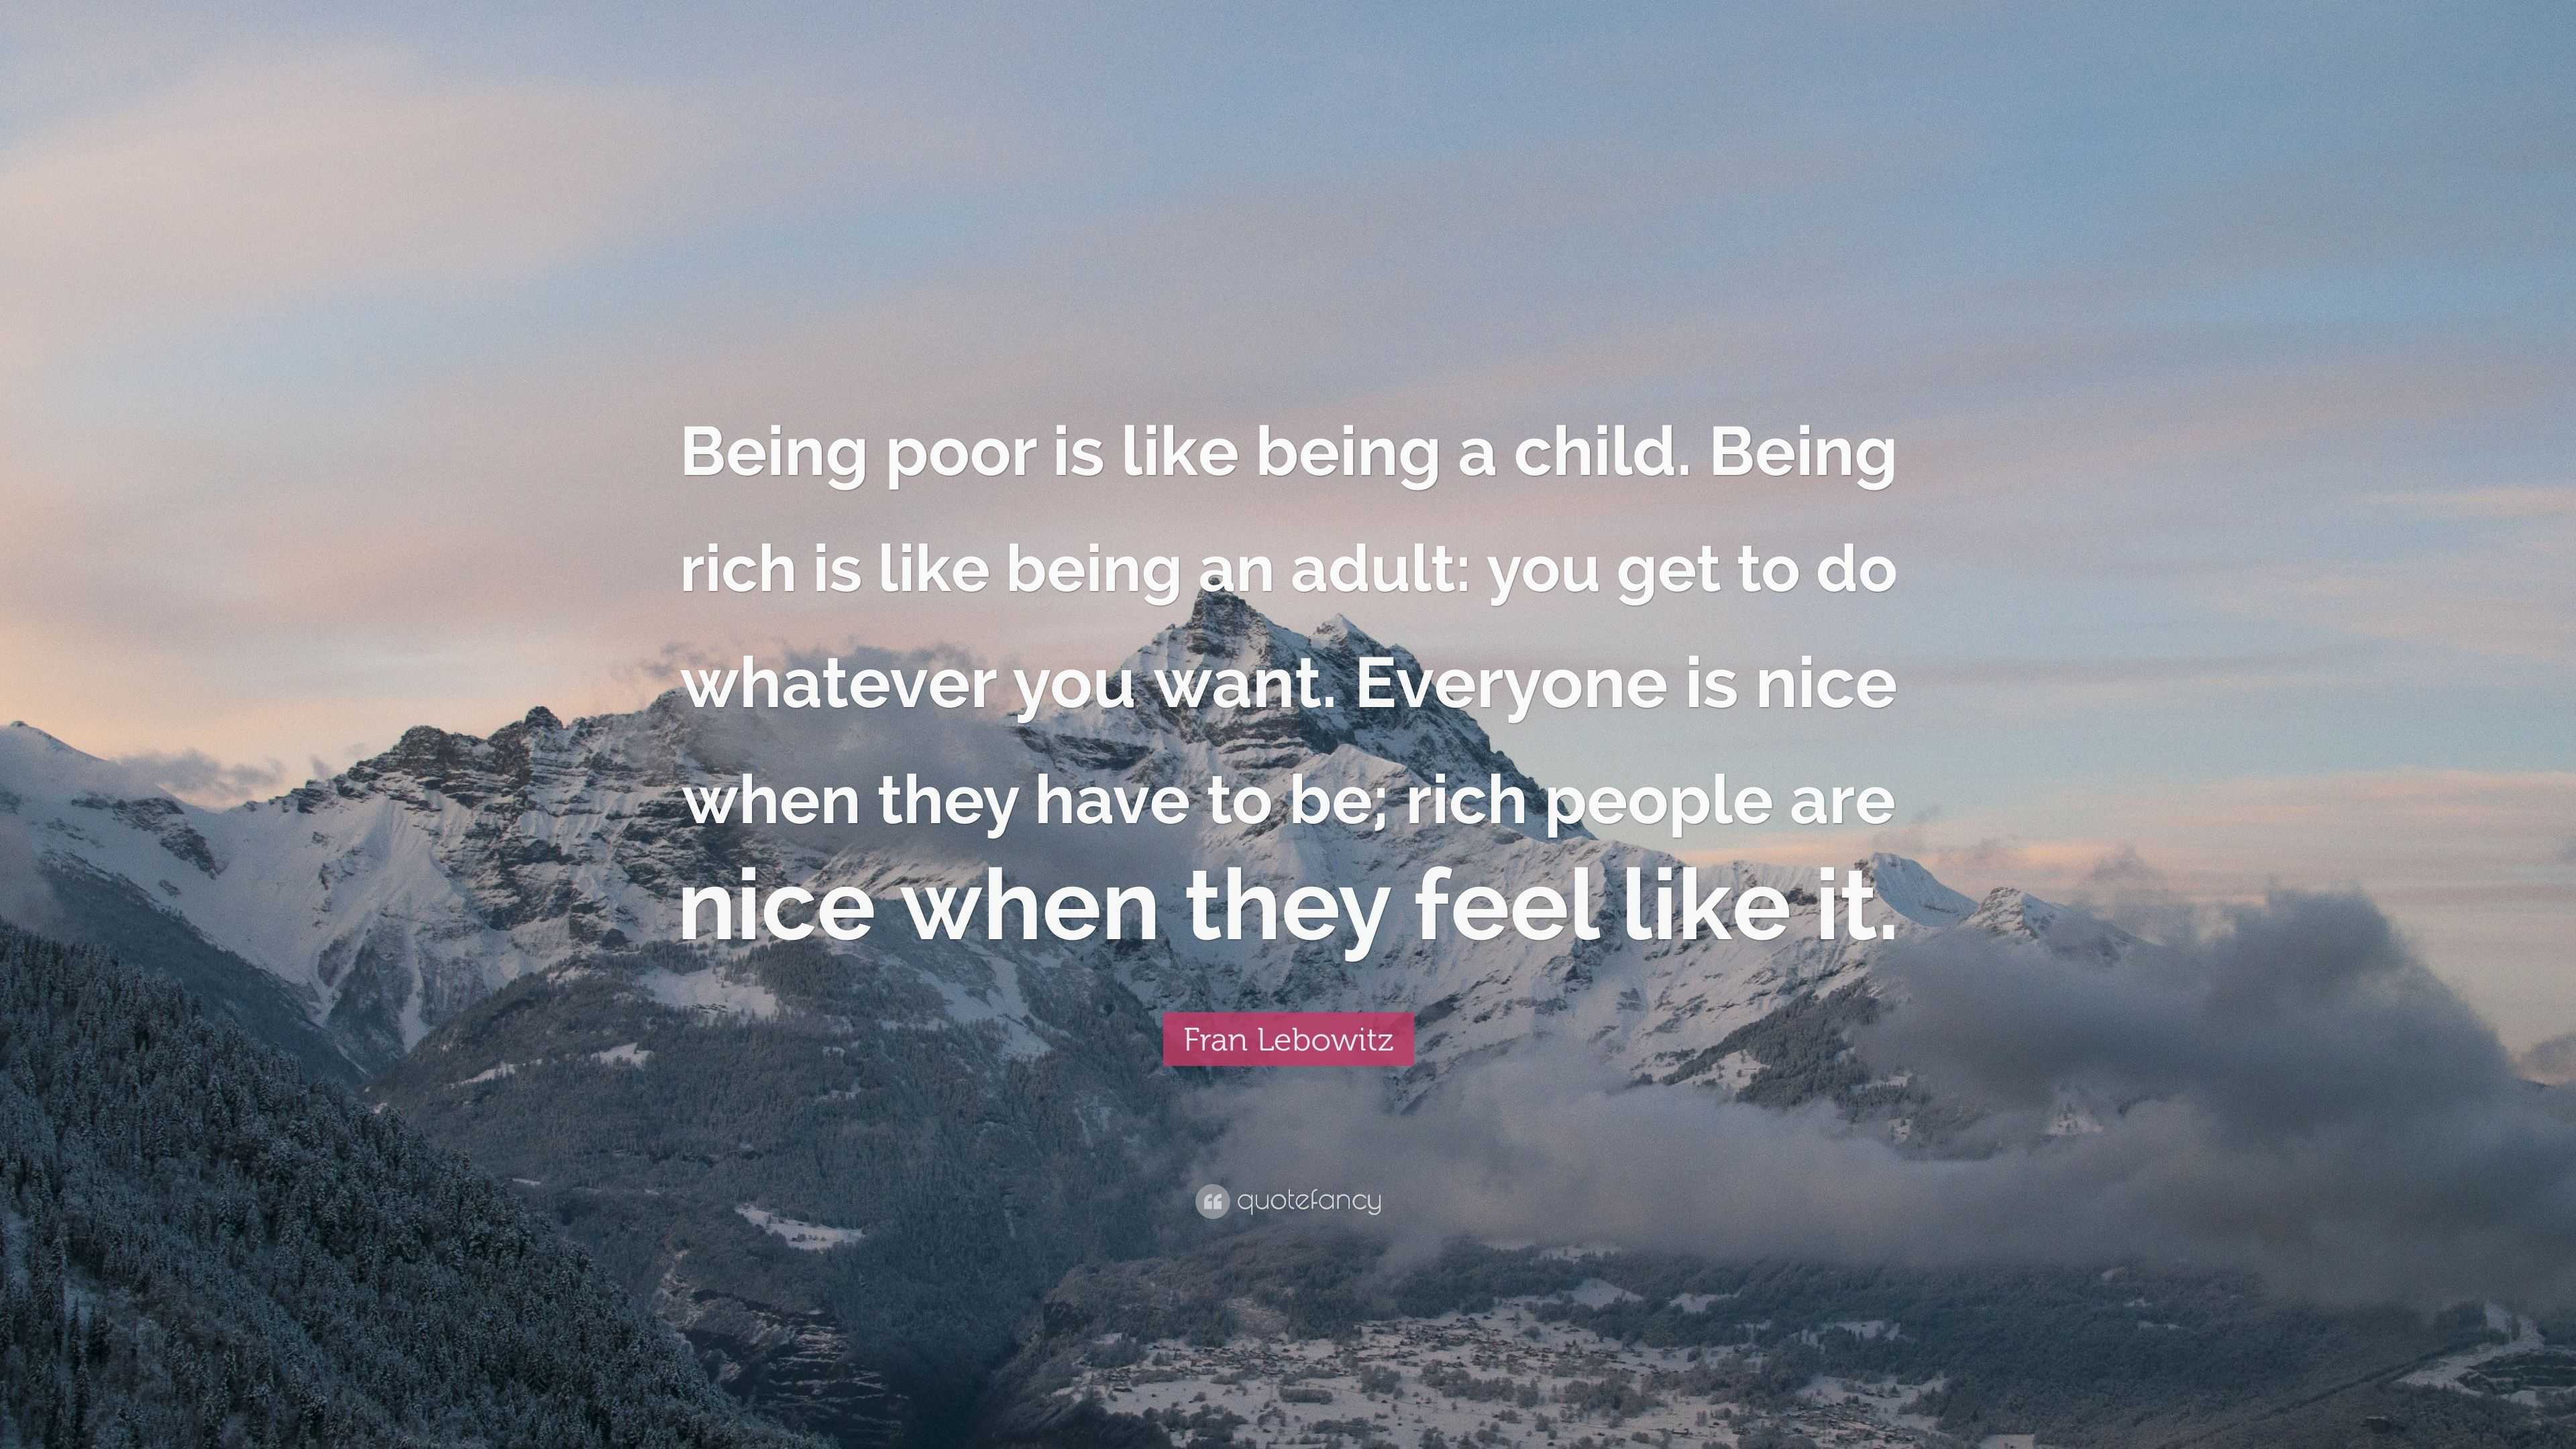 Fran Lebowitz Quote: “Being poor is like being a child. Being rich is ...